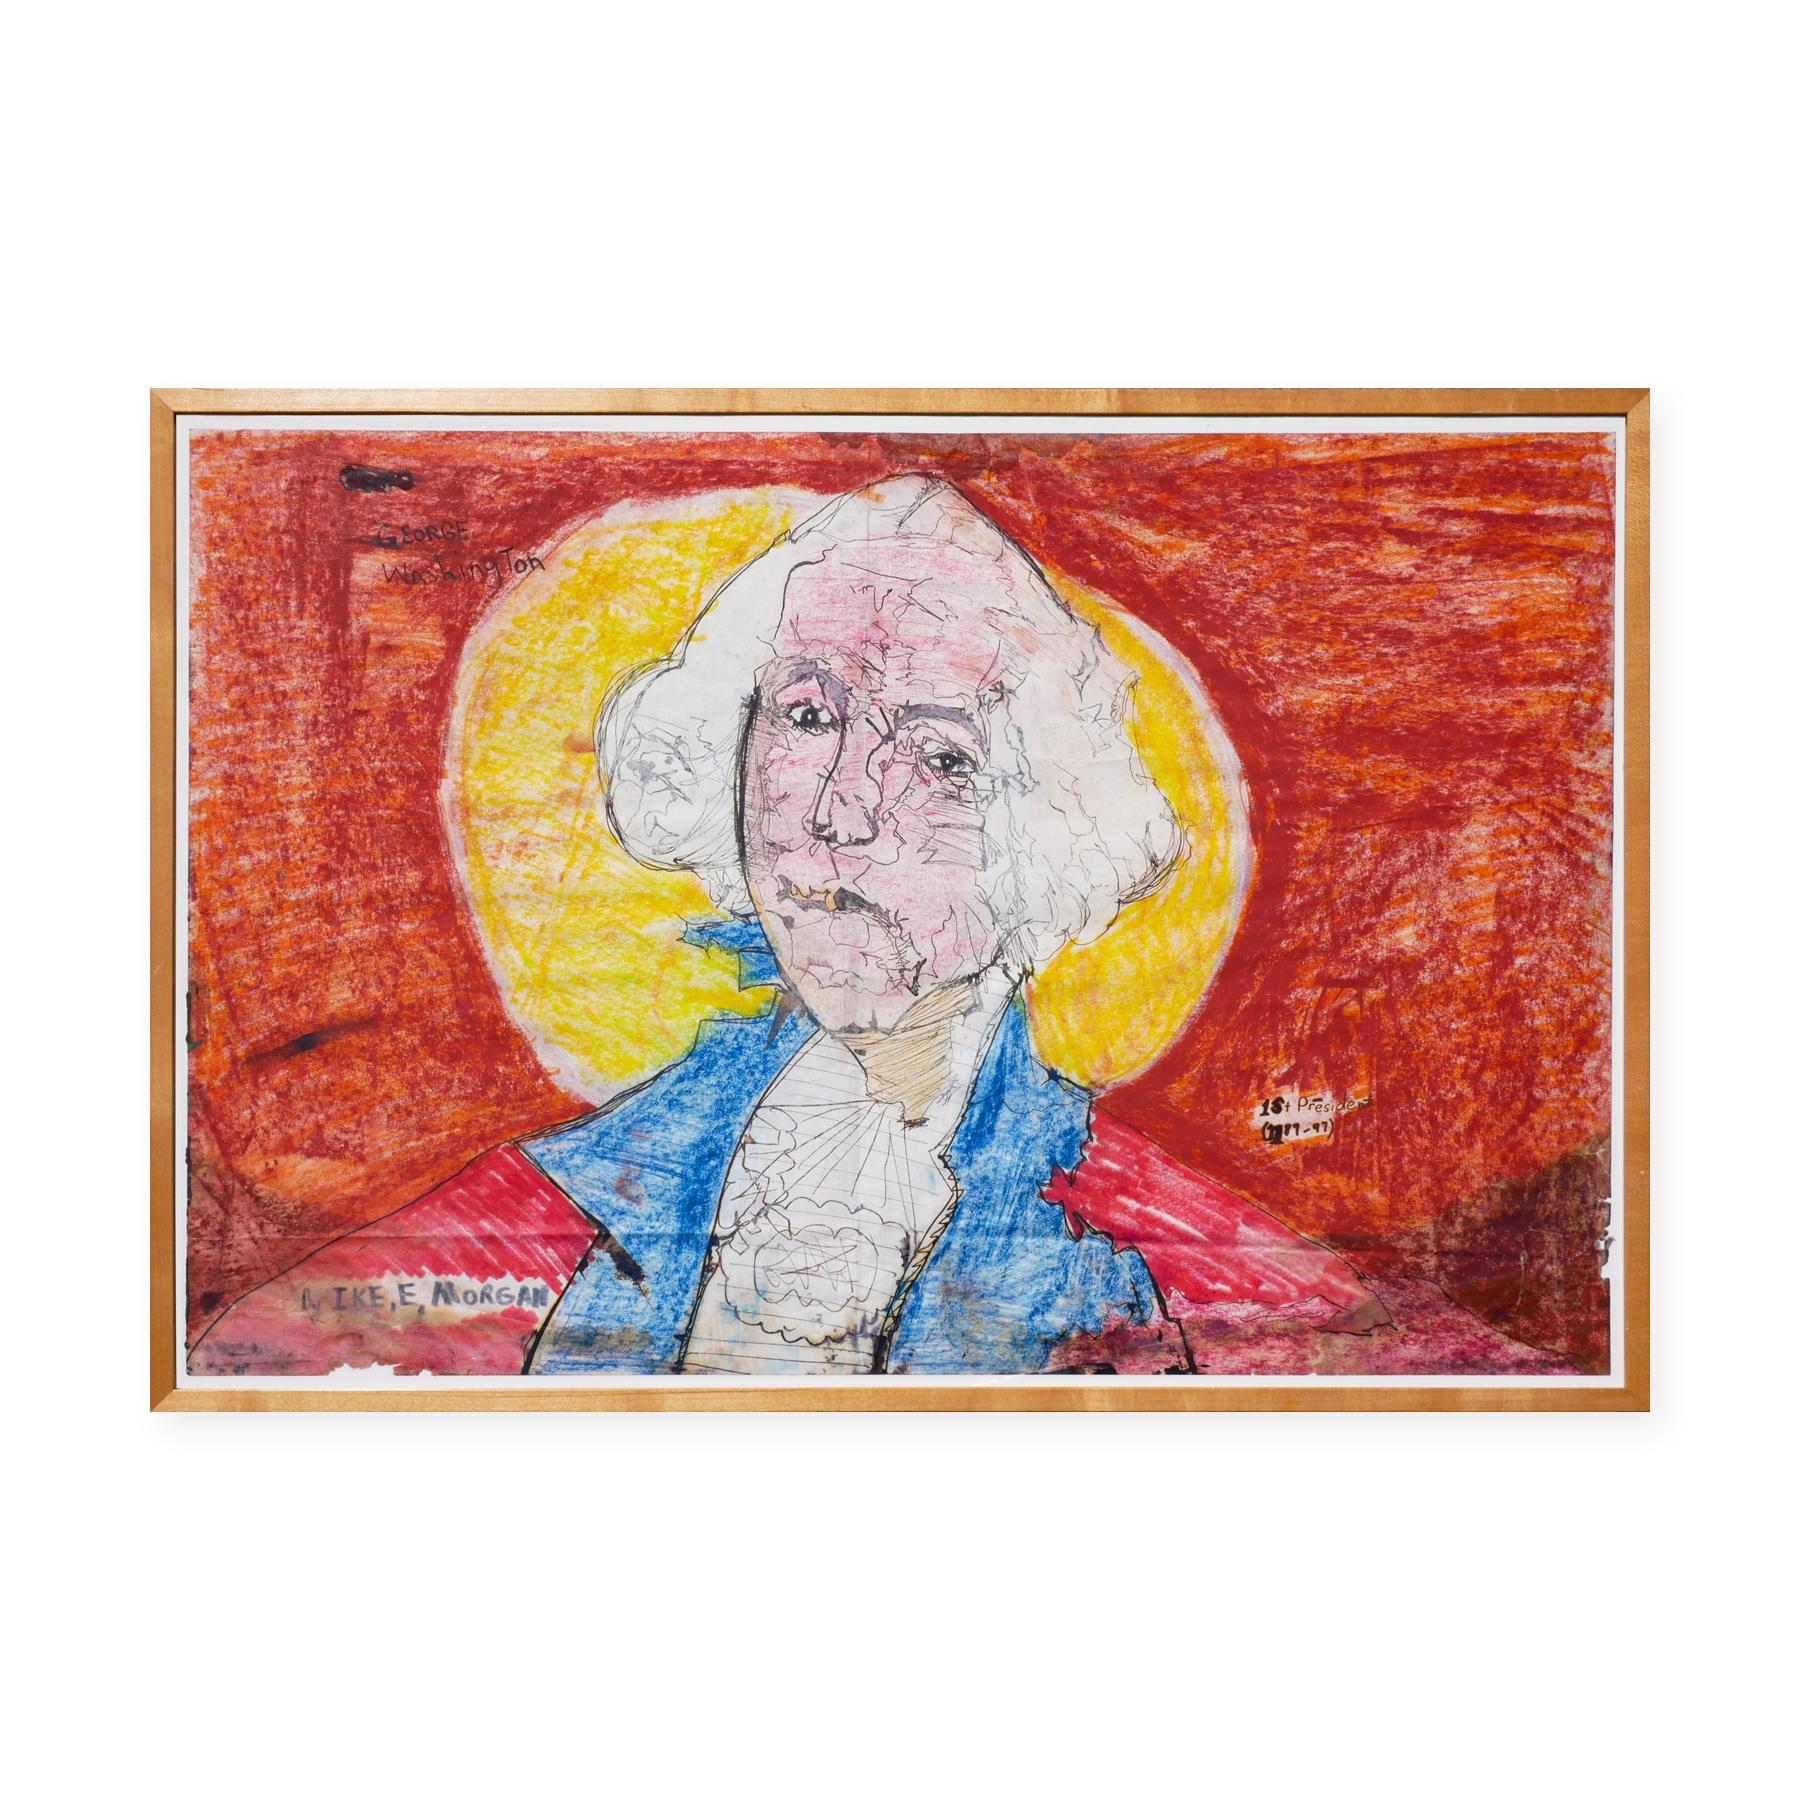 “Untitled” Orange, Blue & Yellow Abstract Portrait of George Washington - Abstract Expressionist Art by Ike E. Morgan